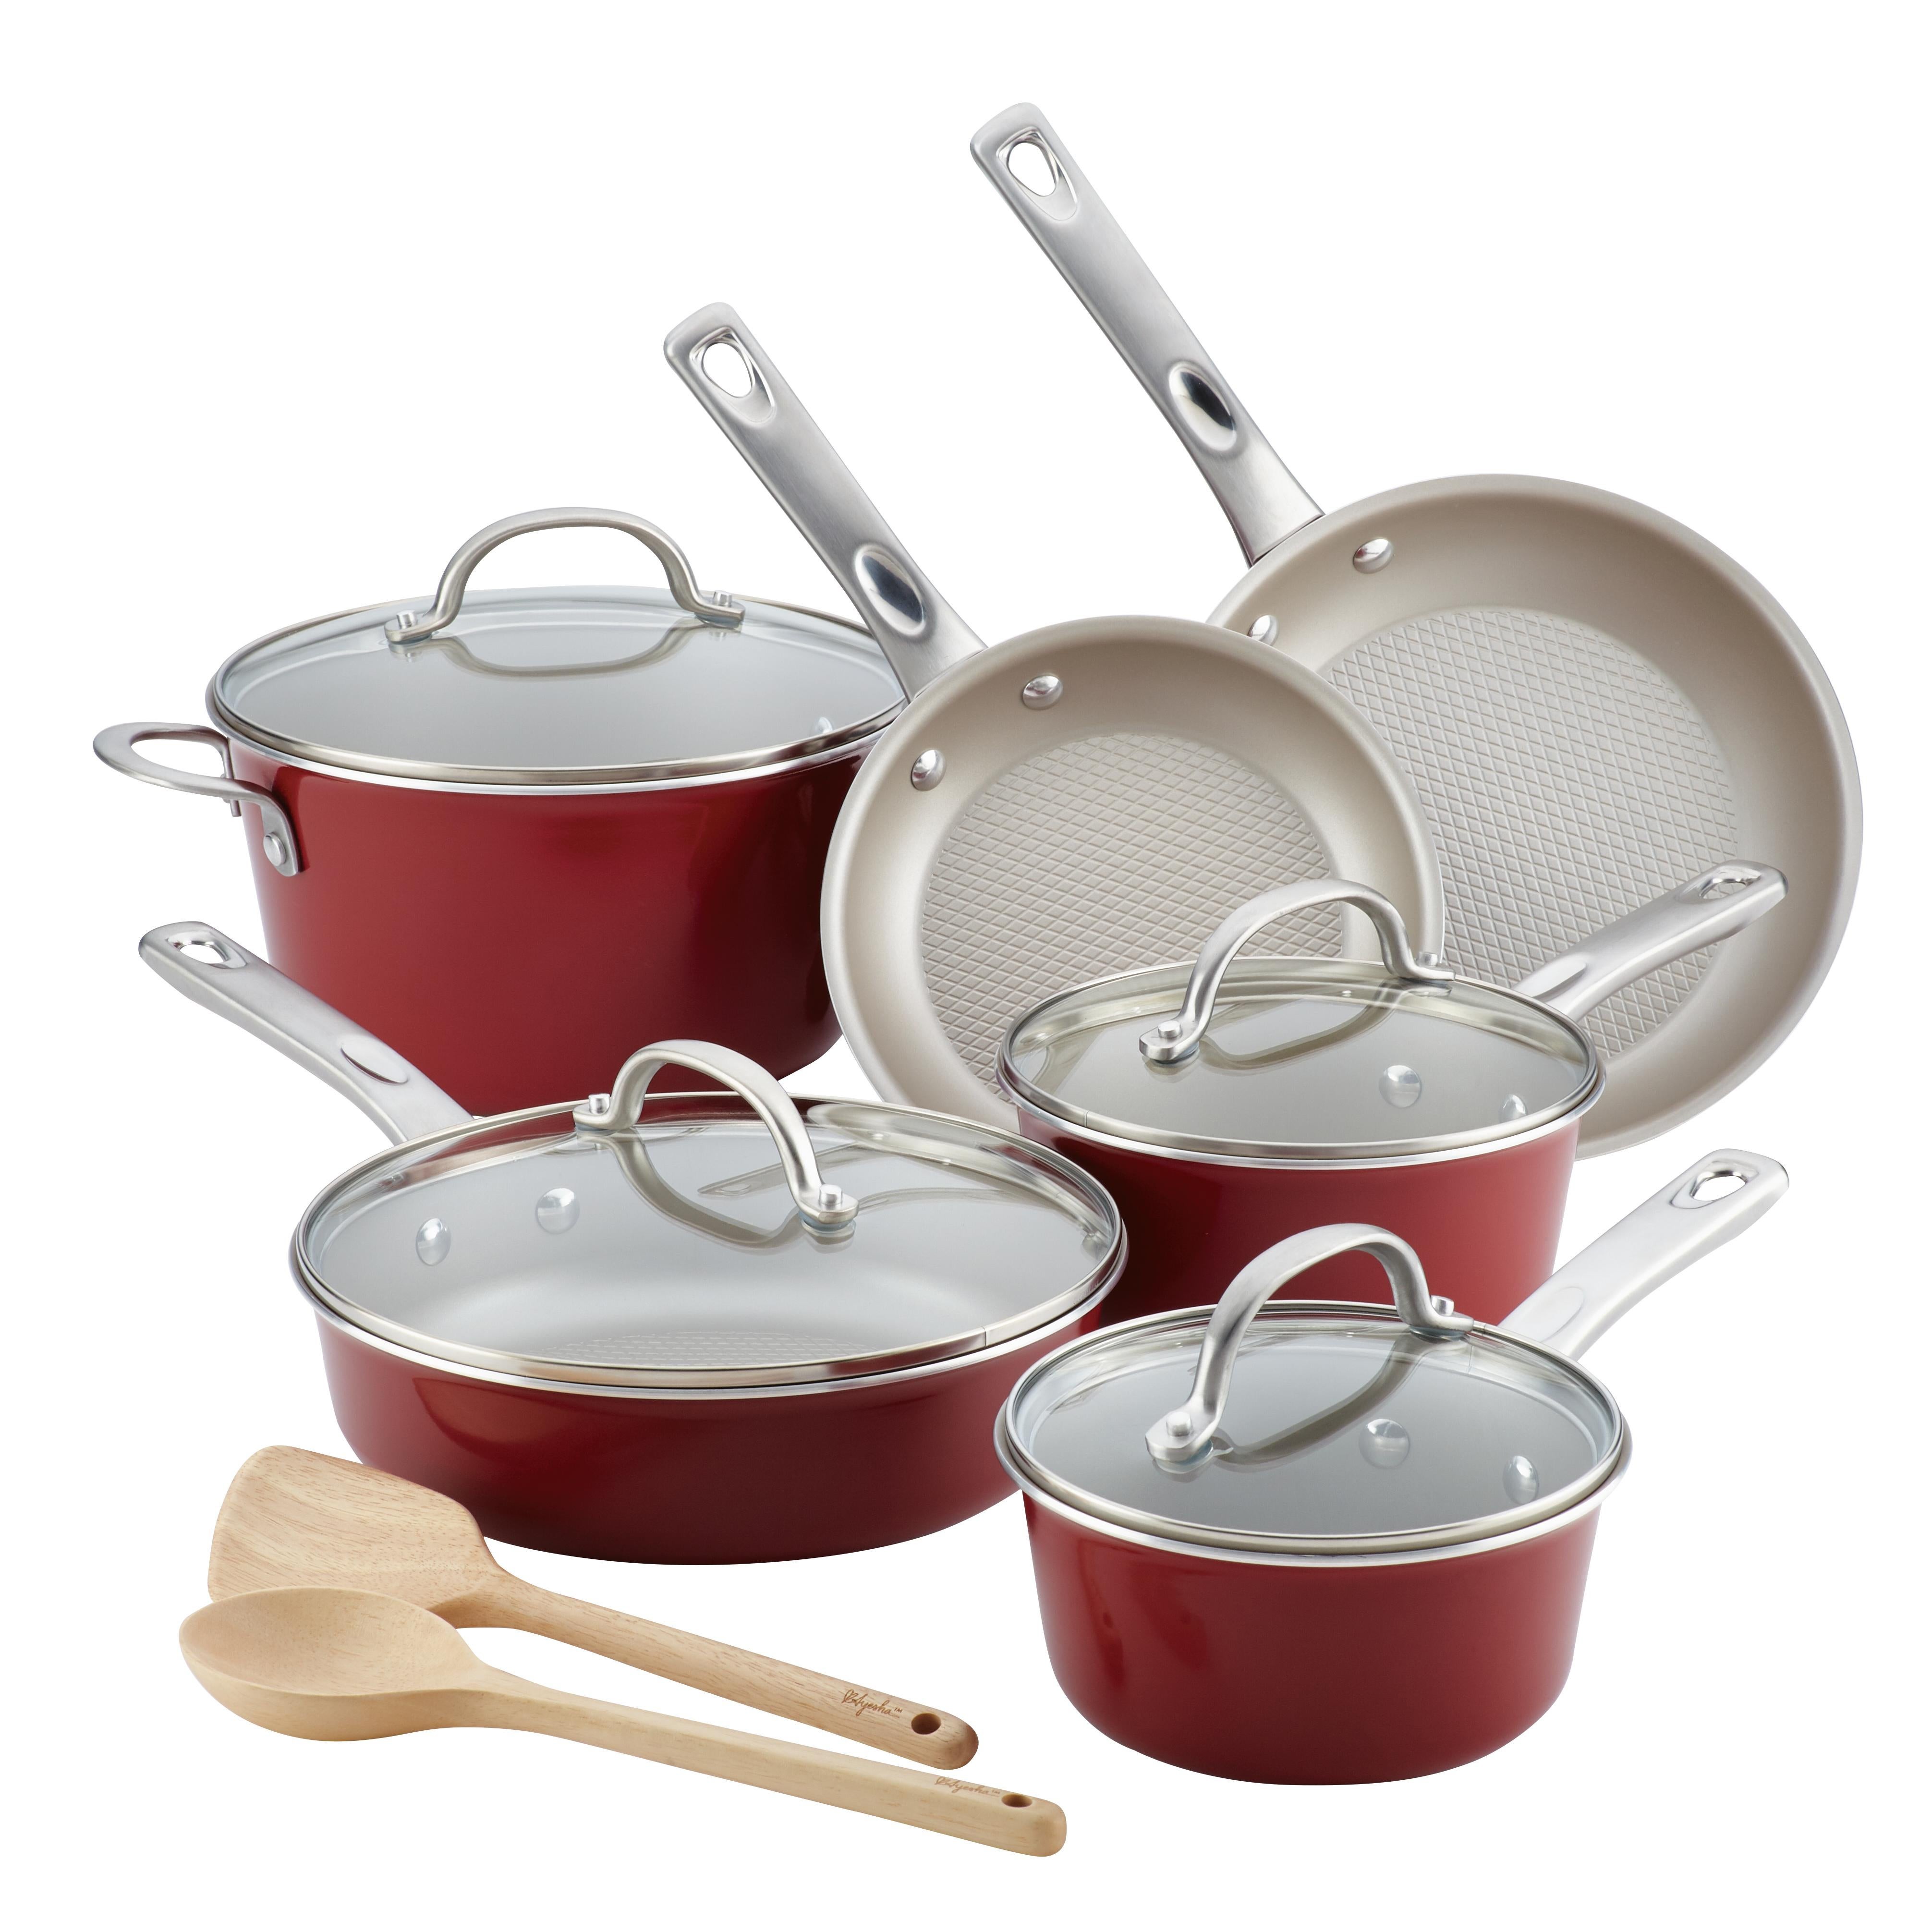 12pc Home Collection Nonstick Cookware Set Sienna Red